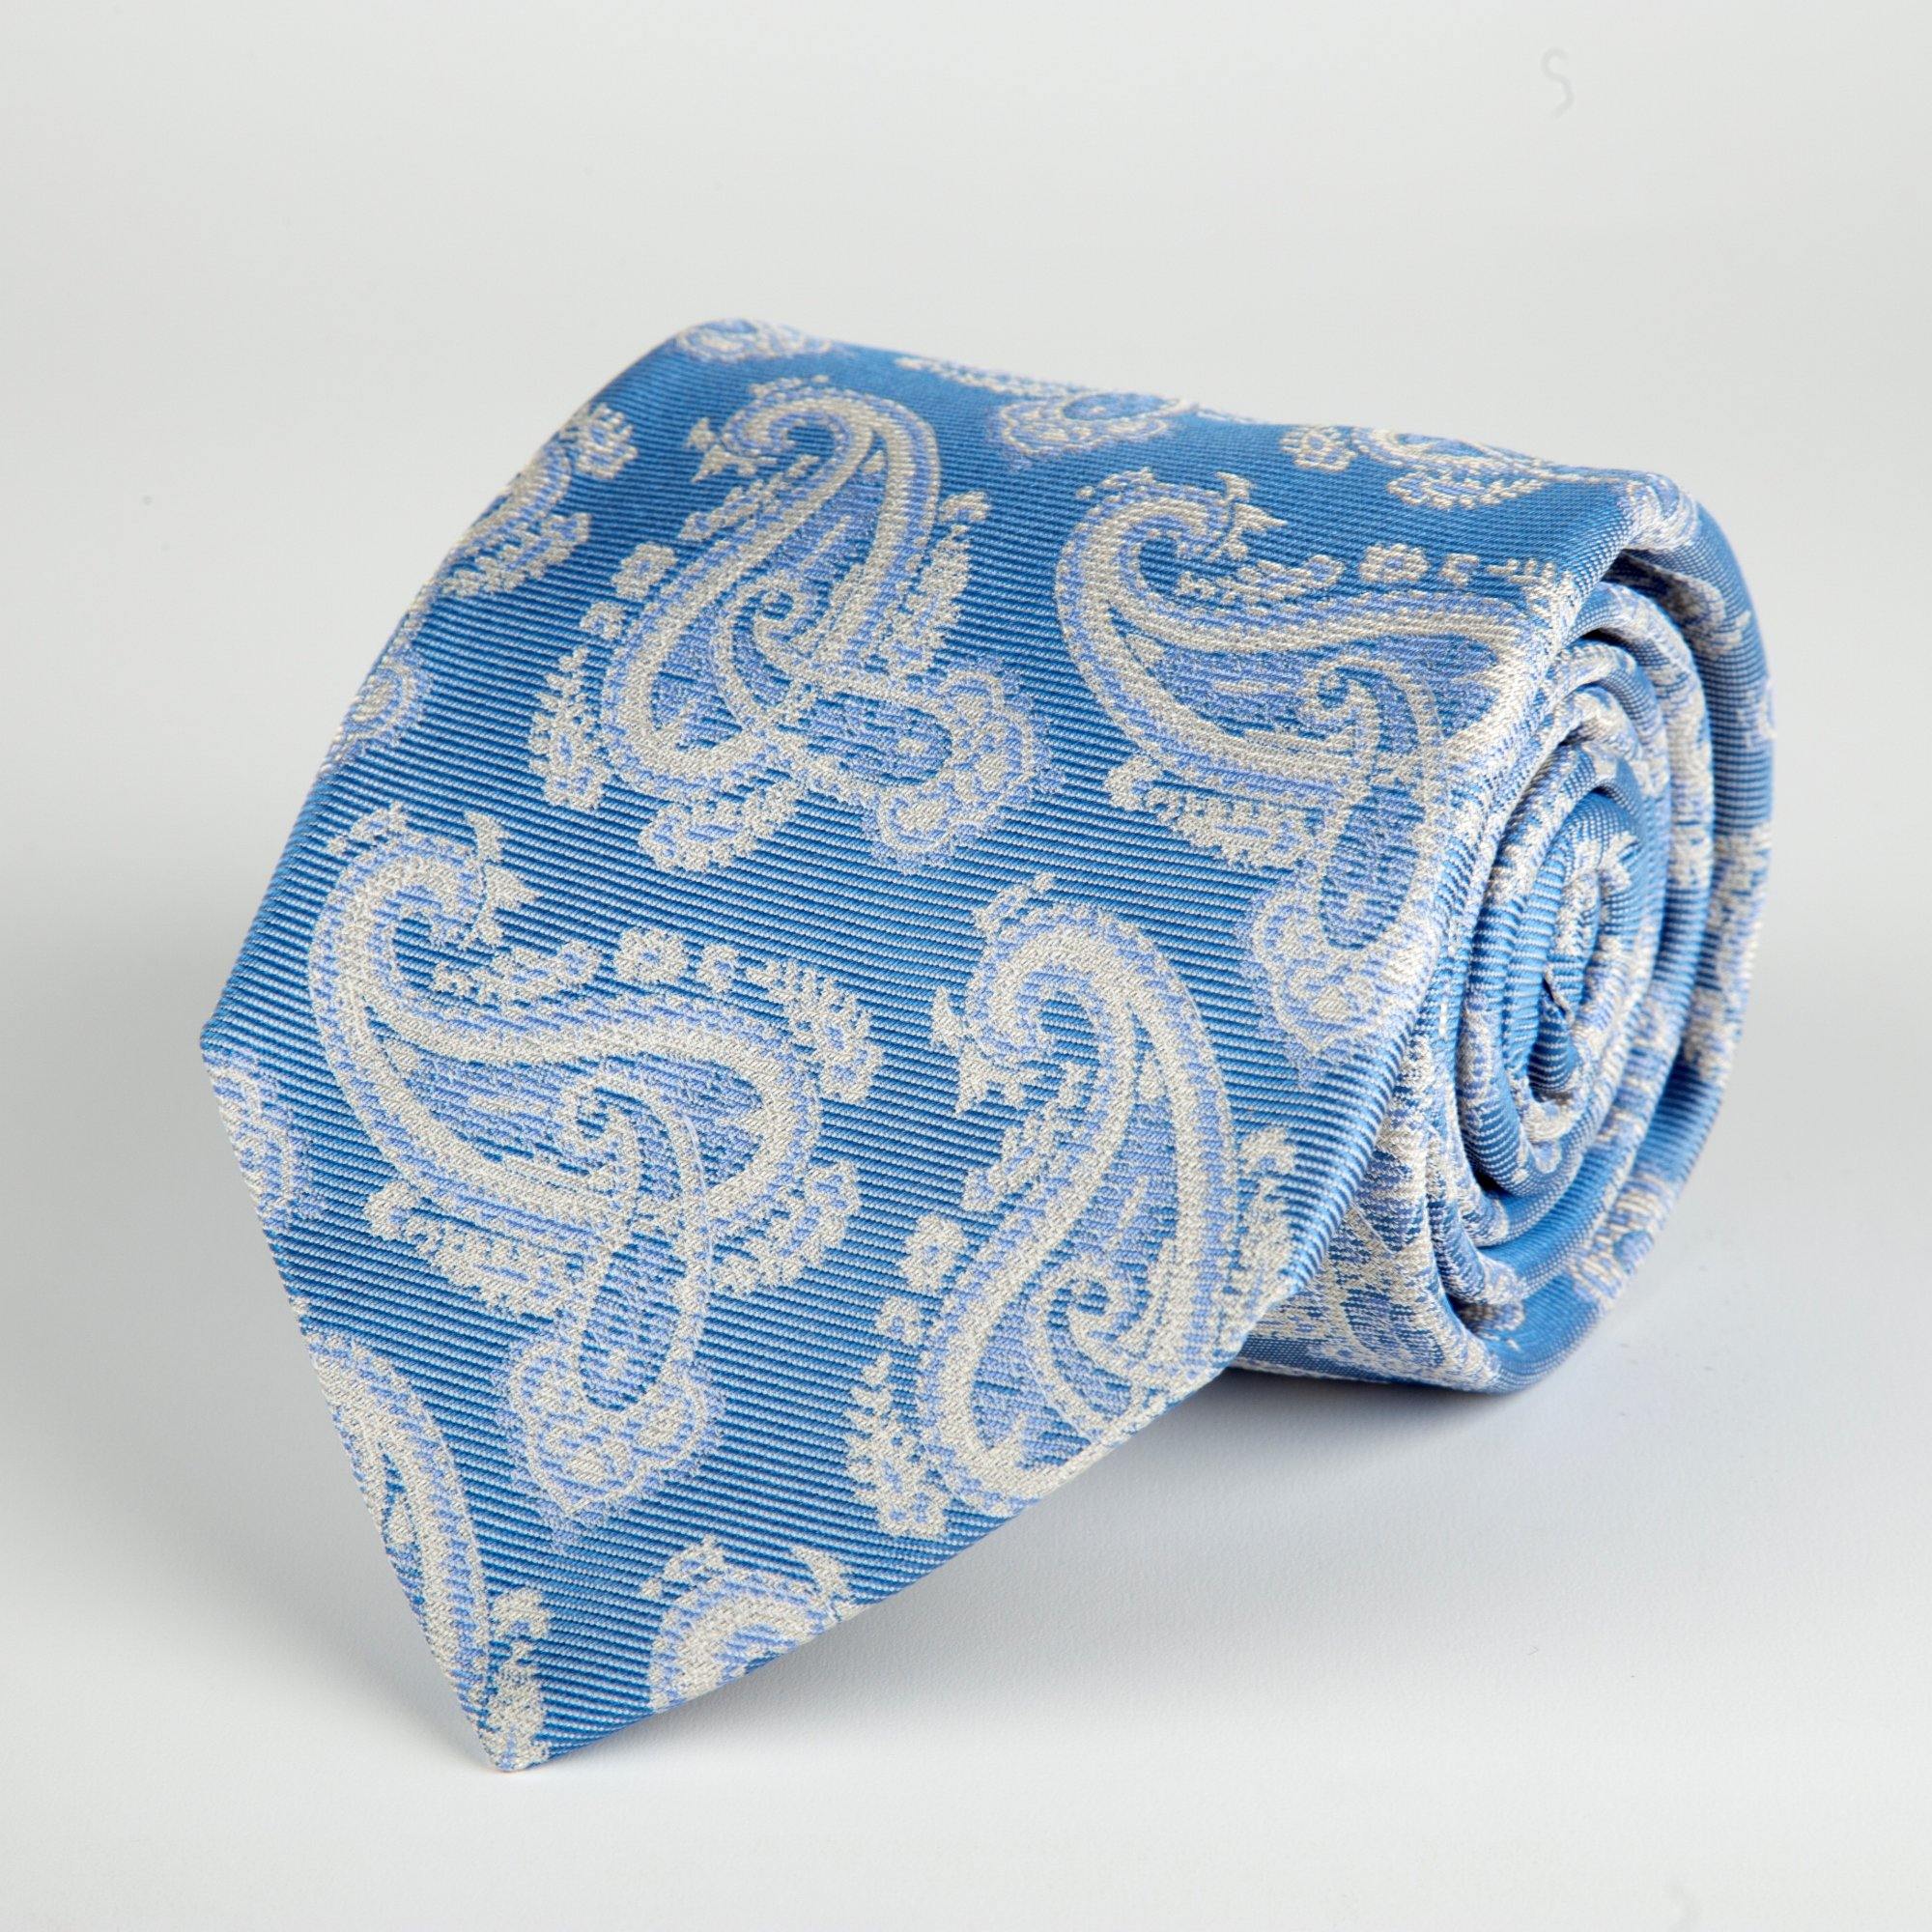 Blue Floral Paisley Woven Silk Tie Hand Finished - British Made